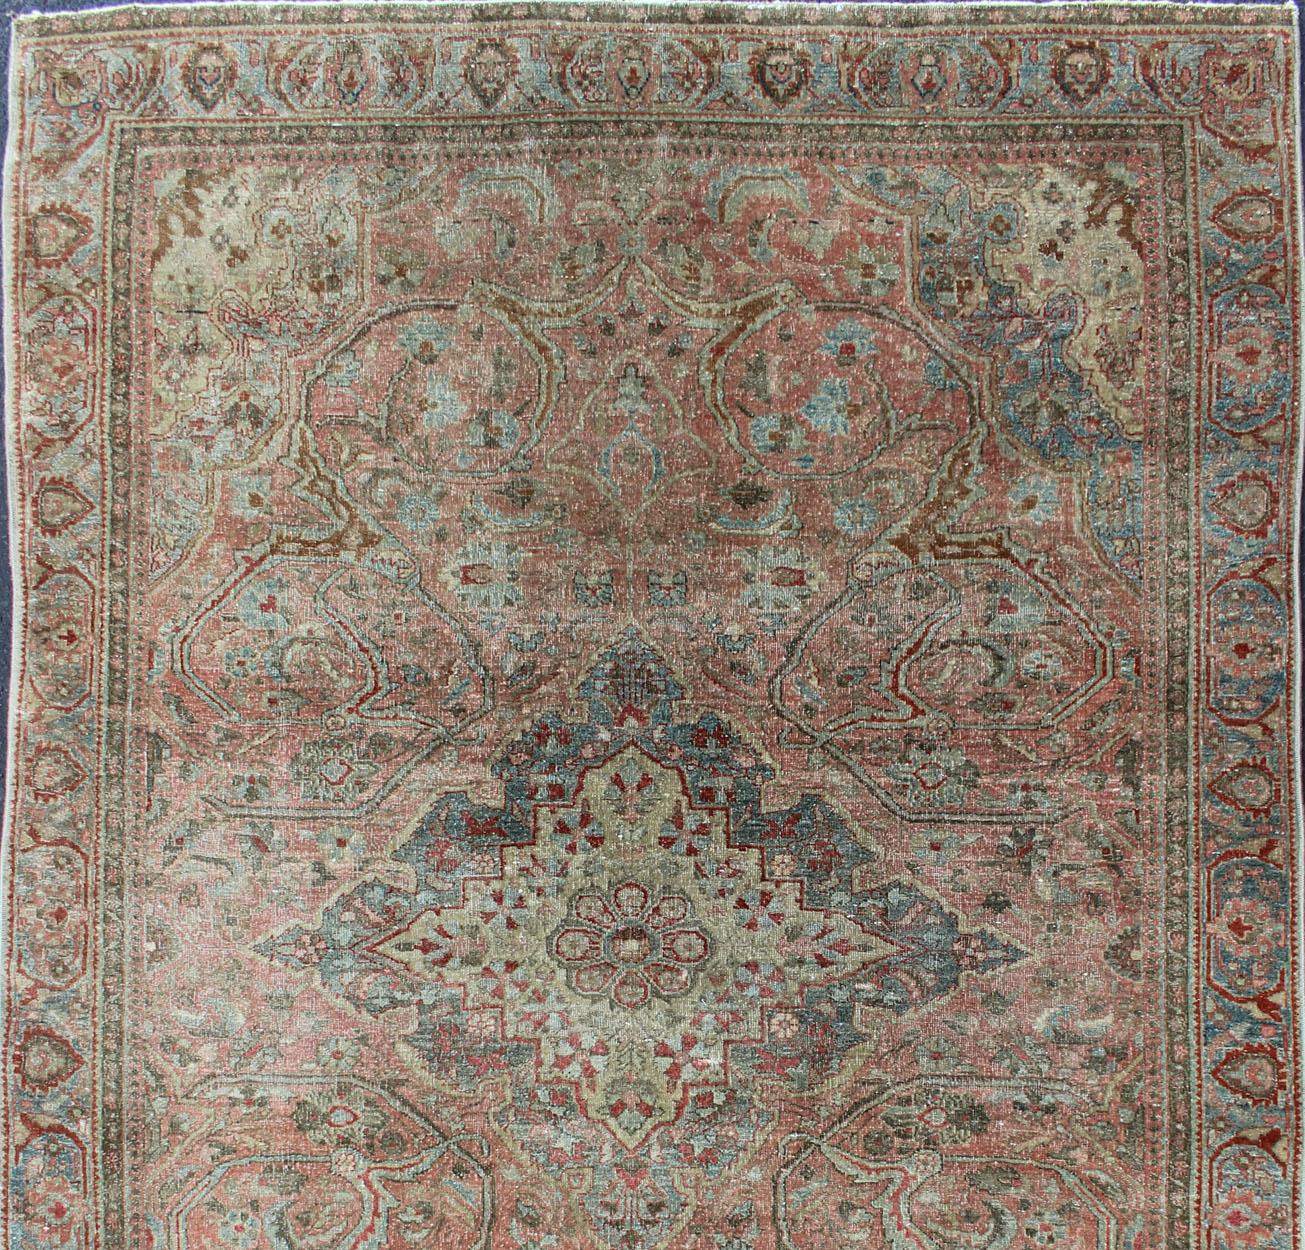 Late 19th century antique Sarouk Farahan rug with medallion and floral pattern, rug j10-0804, country of origin / type: Iran / Sarouk Farahan, circa 1890

This outstanding antique Farahan Sarouk carpet is primarily characterized by its classical